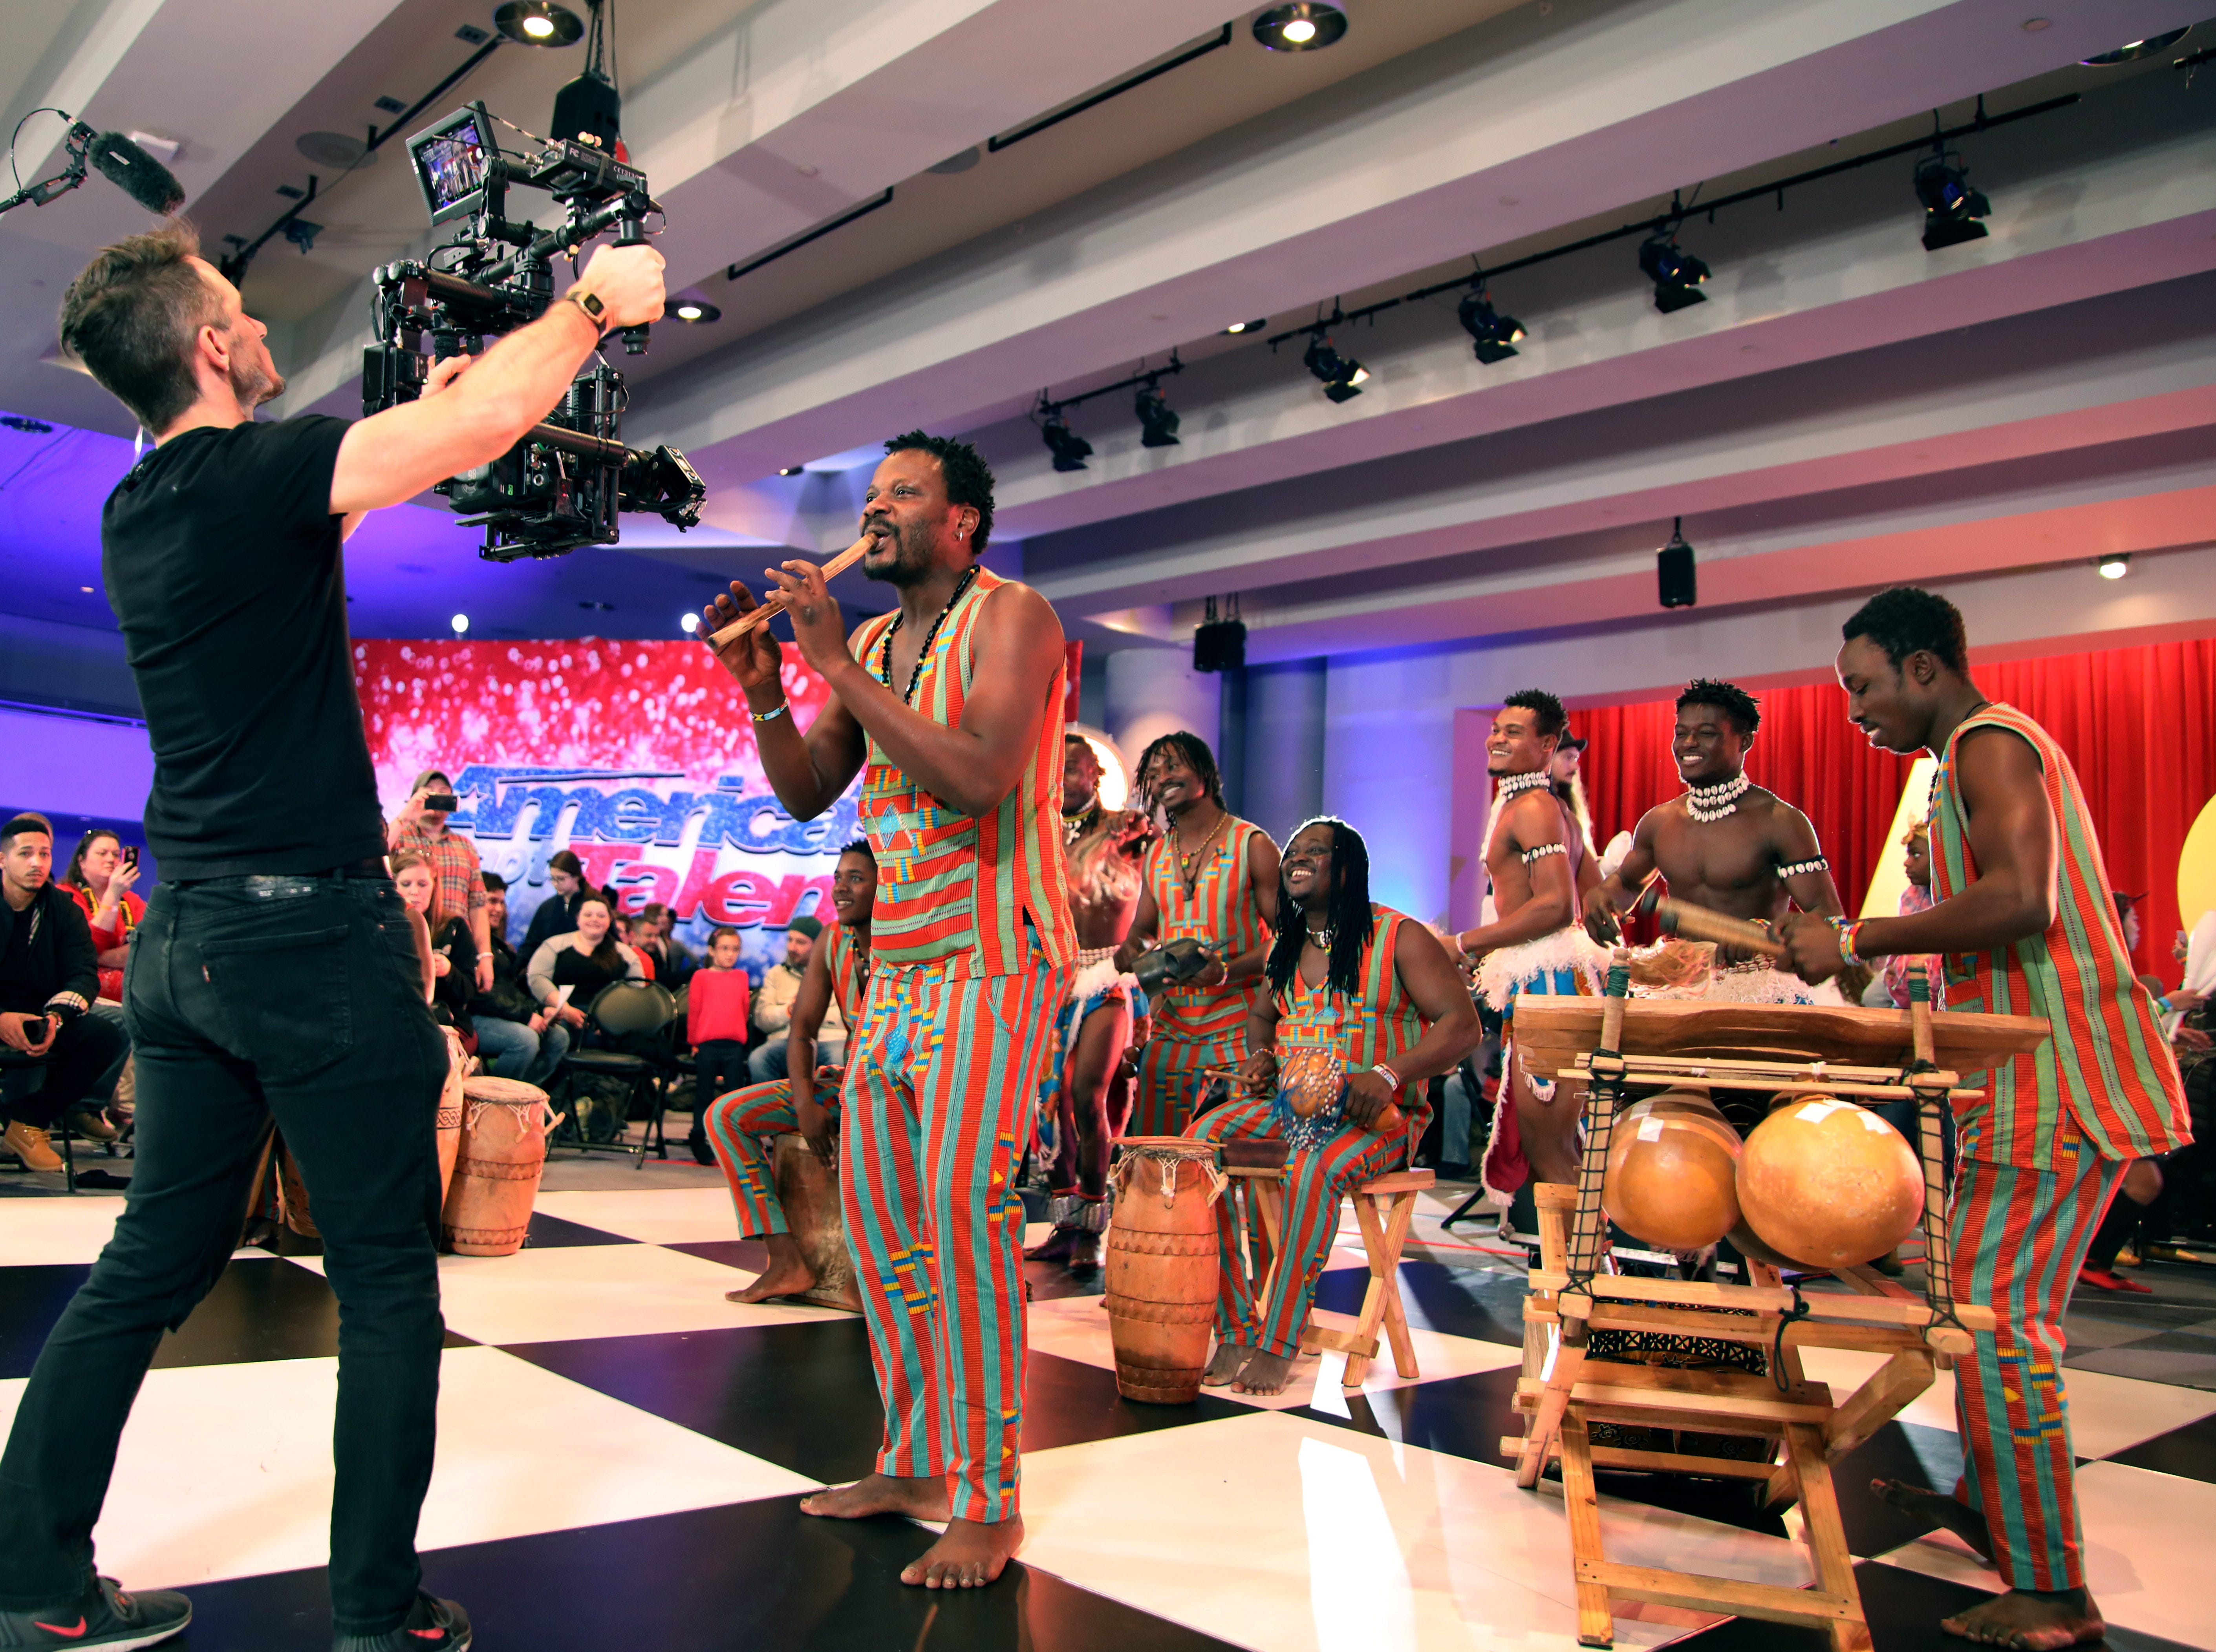 Stephen Nanakojo Asare plays the flute as other members of Womba Africa accompany him in the holding room of 'America's Got Talent' auditions.